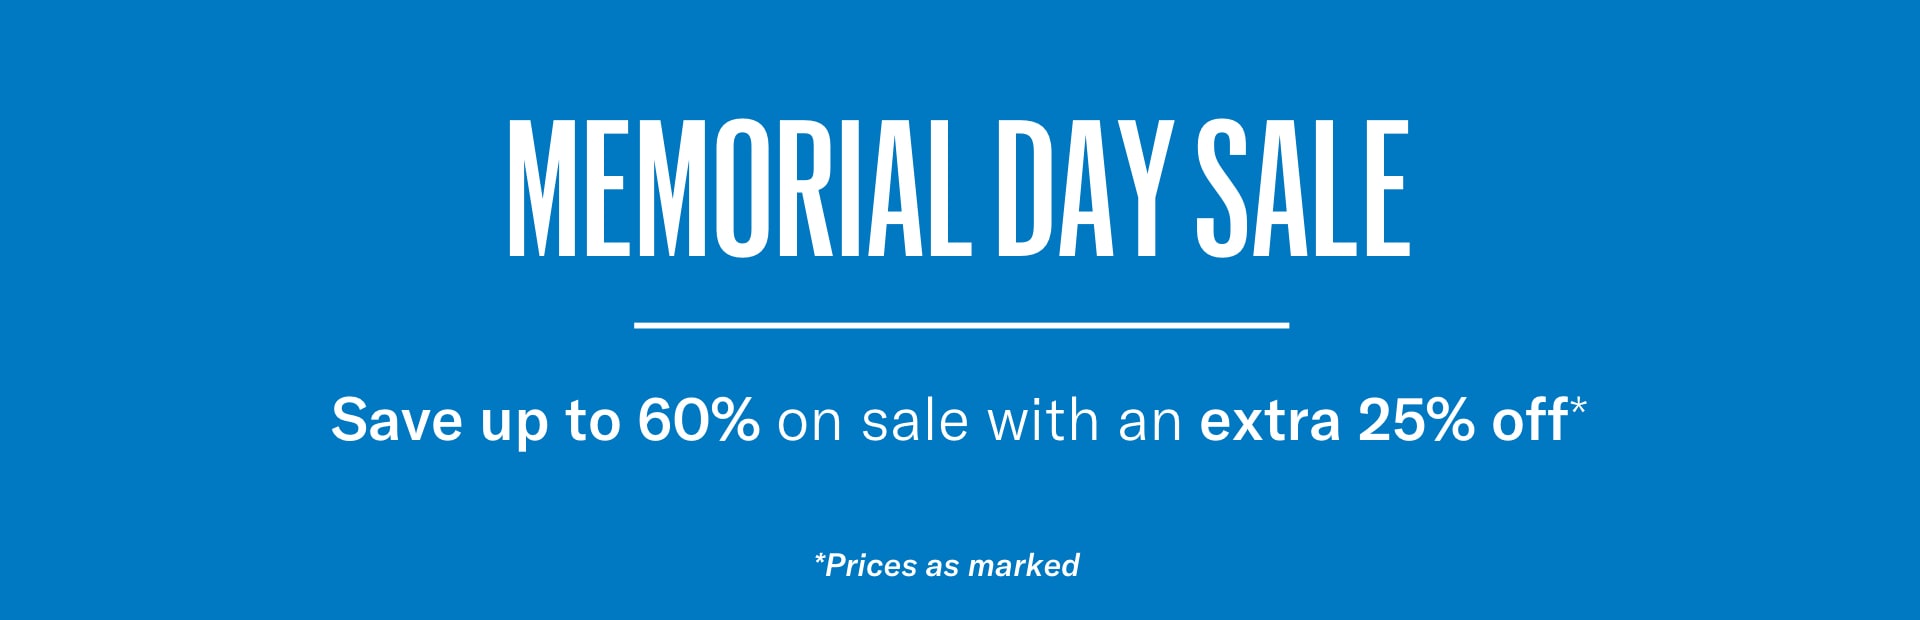 Memorial Day Sale | Save up to 60% off sale styles | Discount already applied